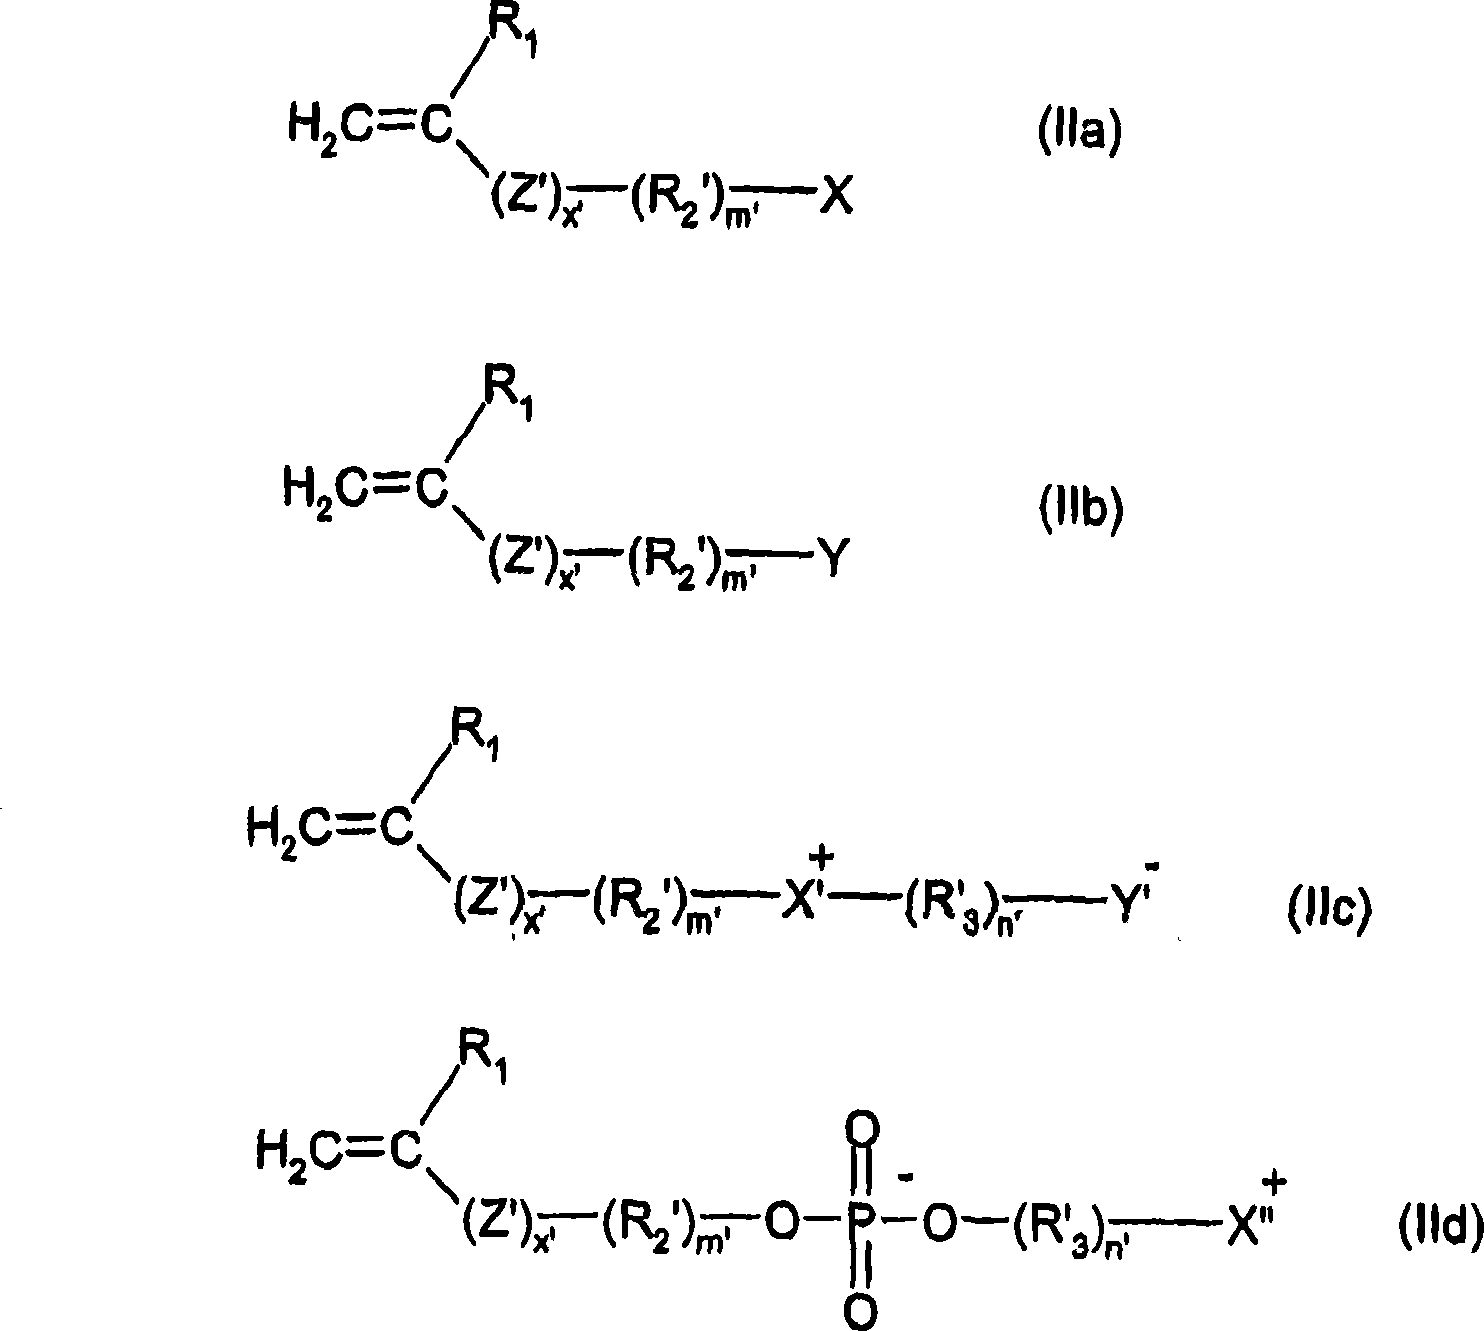 Cosmetic compositions containing at least one surfactant and at least one ethylene copolymer with polyethylene glycol grafts